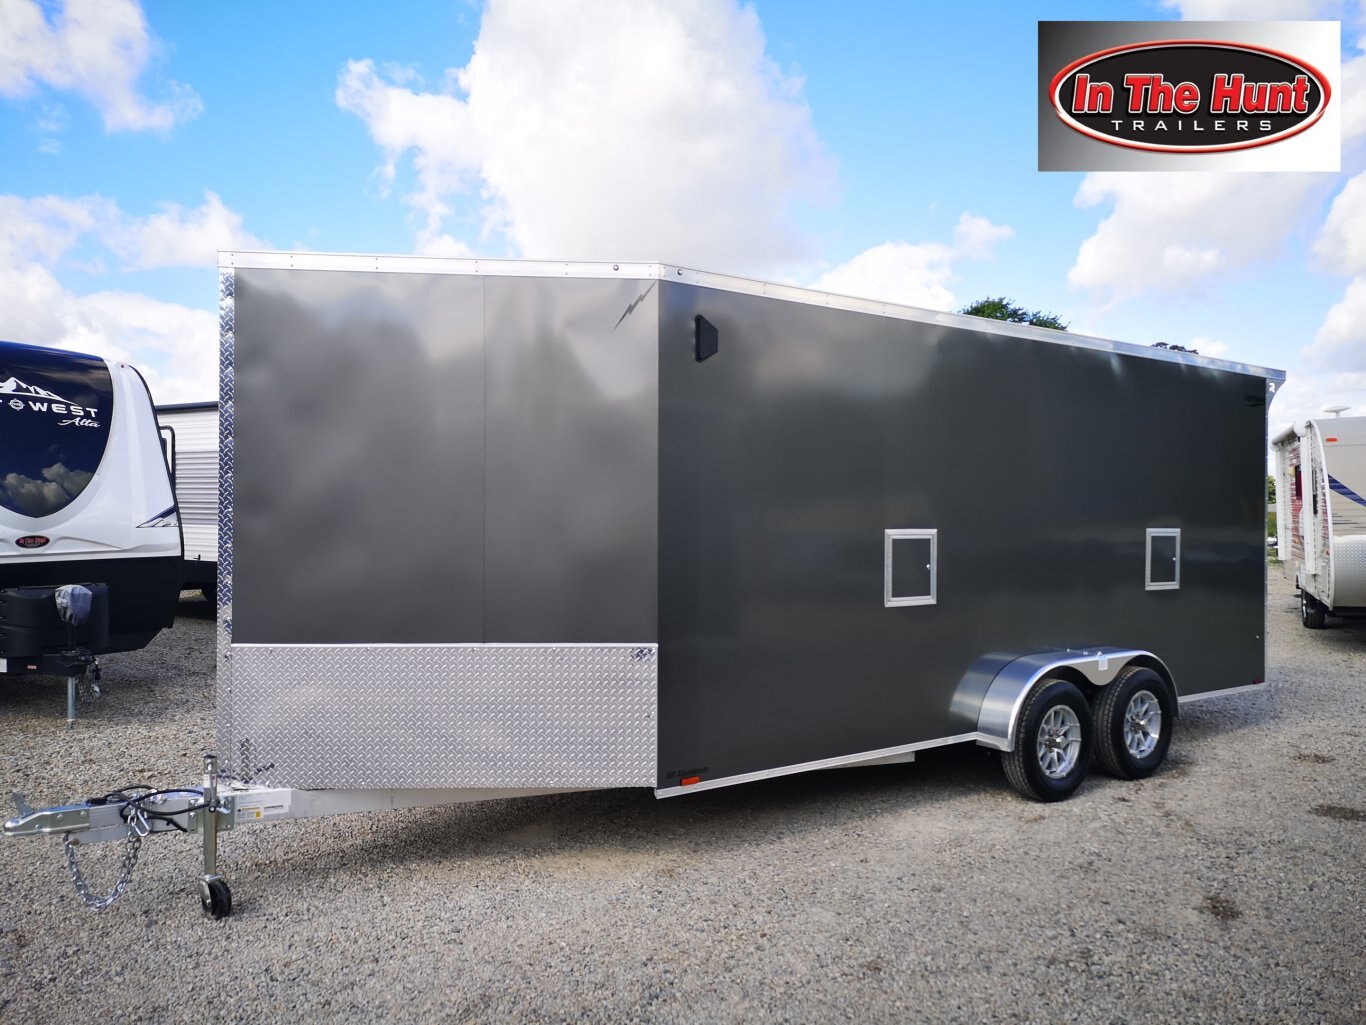 2024 Tow-Tek Trailers 7x23 Drive in/Drive out Aluminum Enclosed - RV Door and Extras!